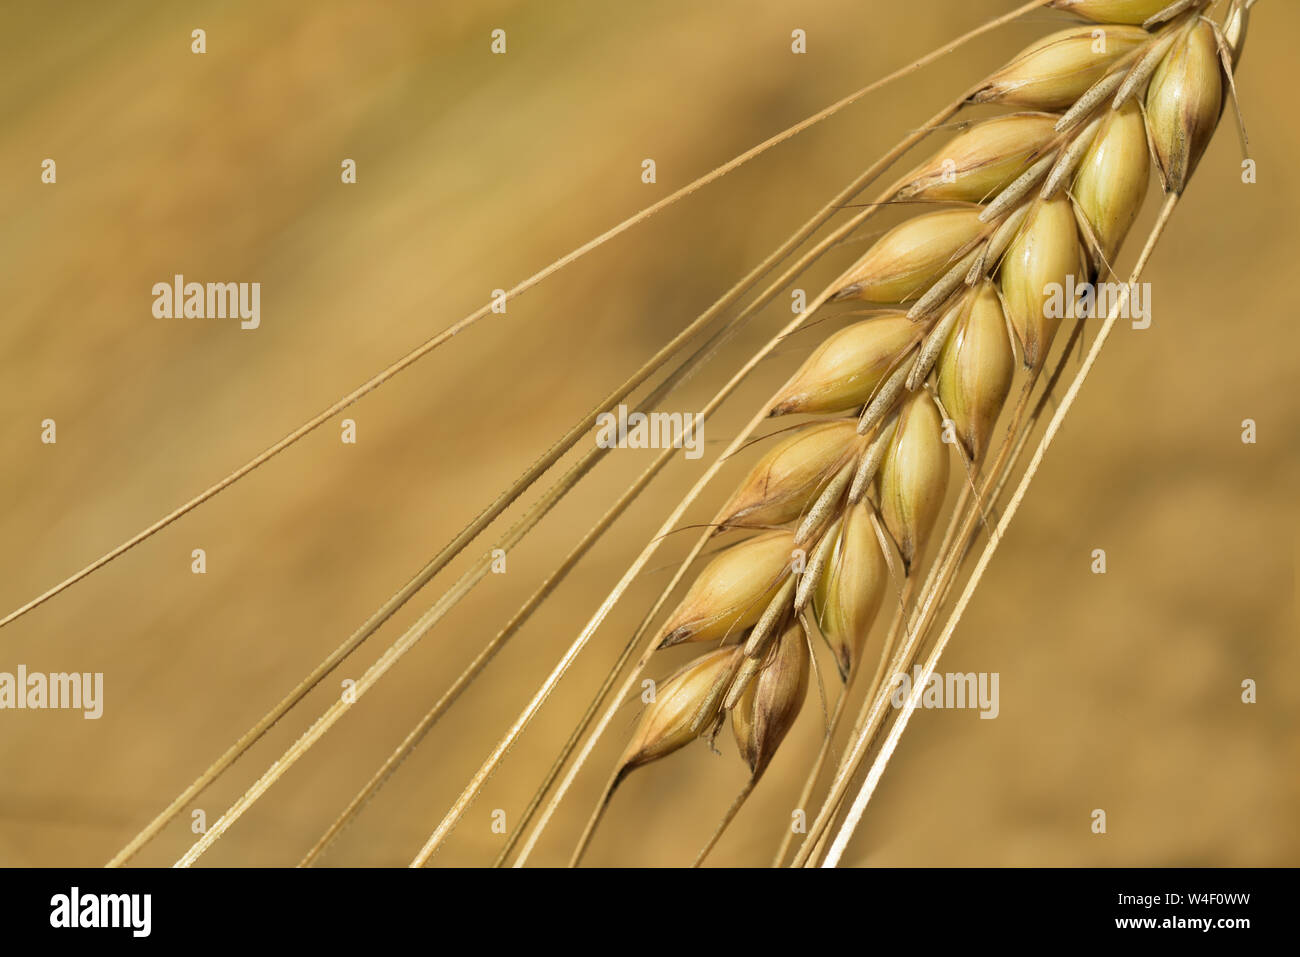 Close-up of a cereal ear in front of light background in summer Stock Photo